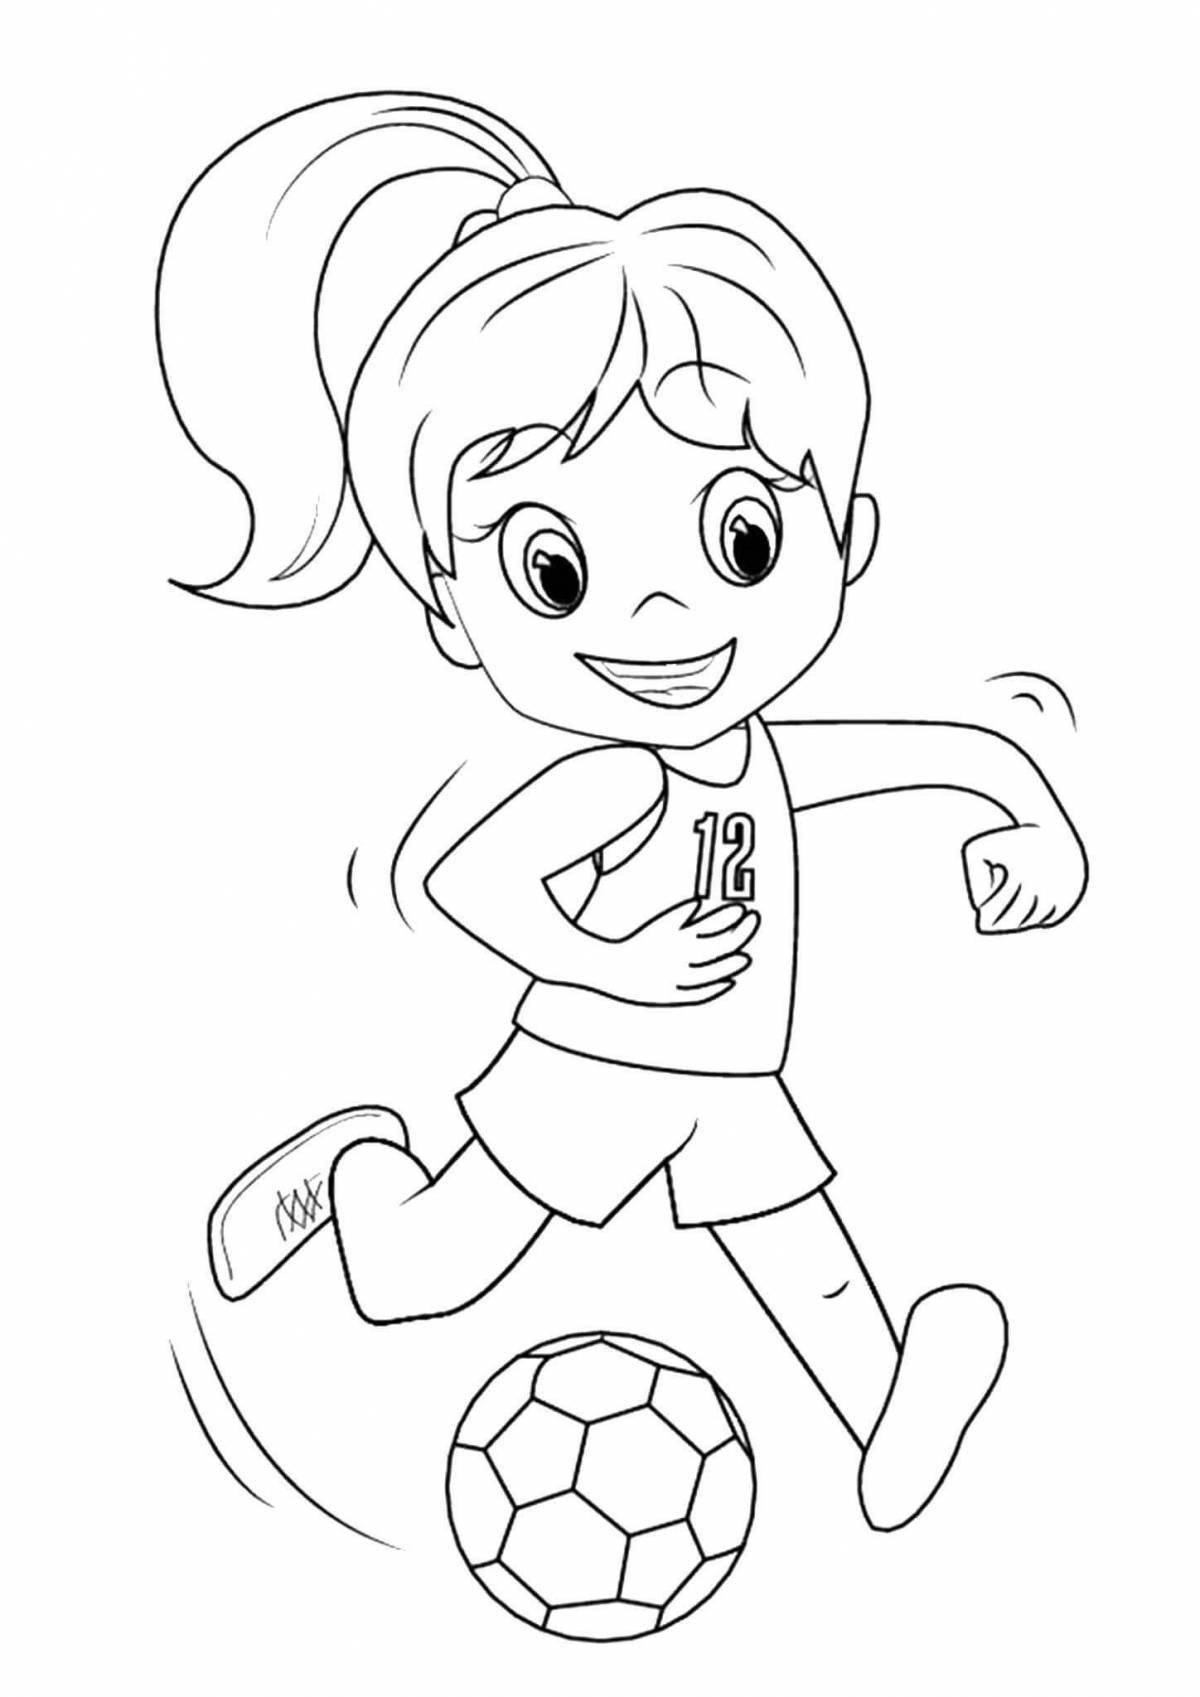 Joyful sports coloring book for kids 6-7 years old